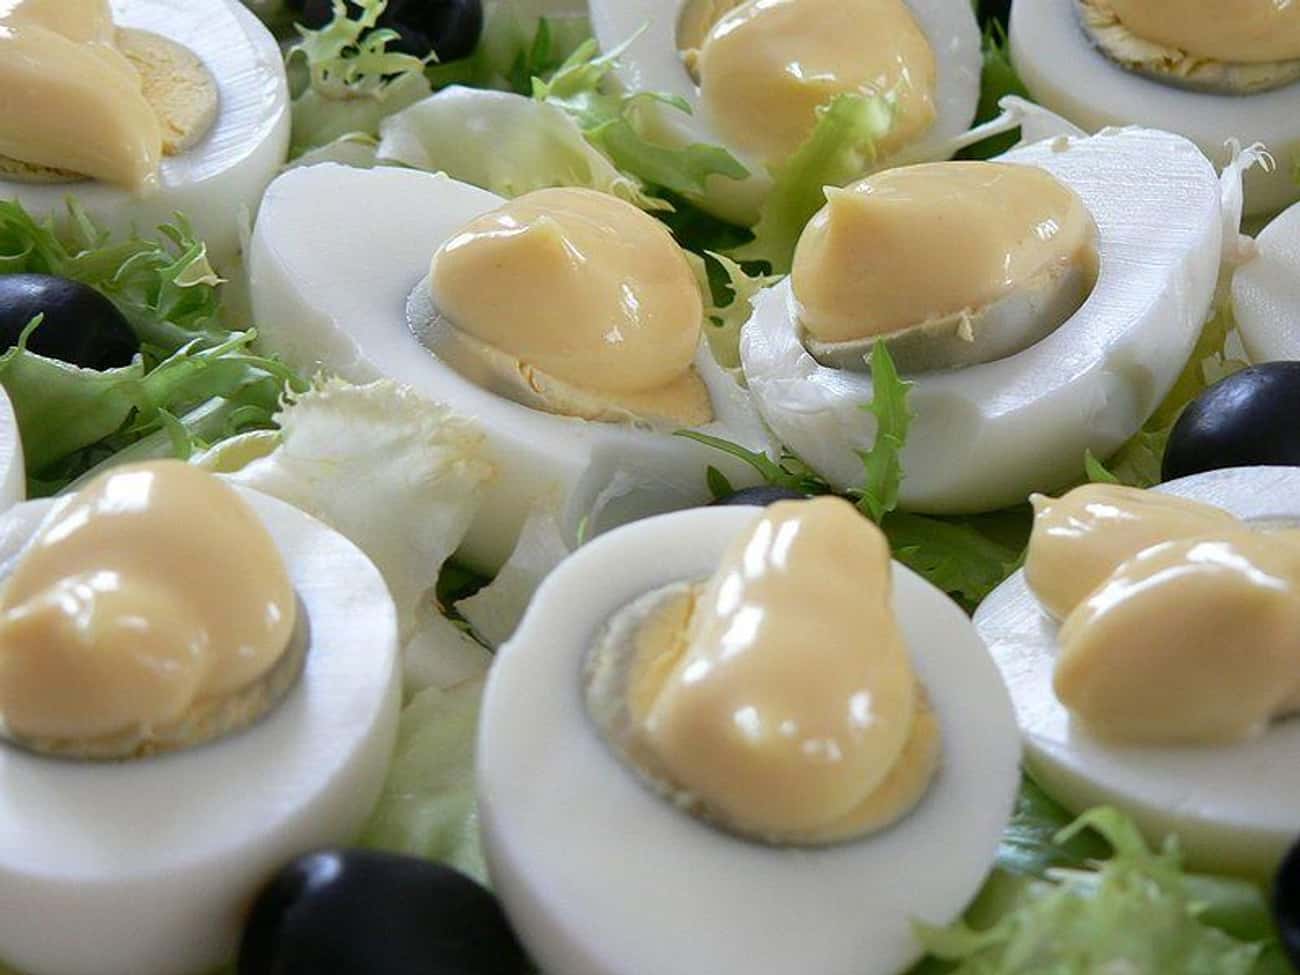 Mayonnaise May Actually Protect Against Food Poisoning